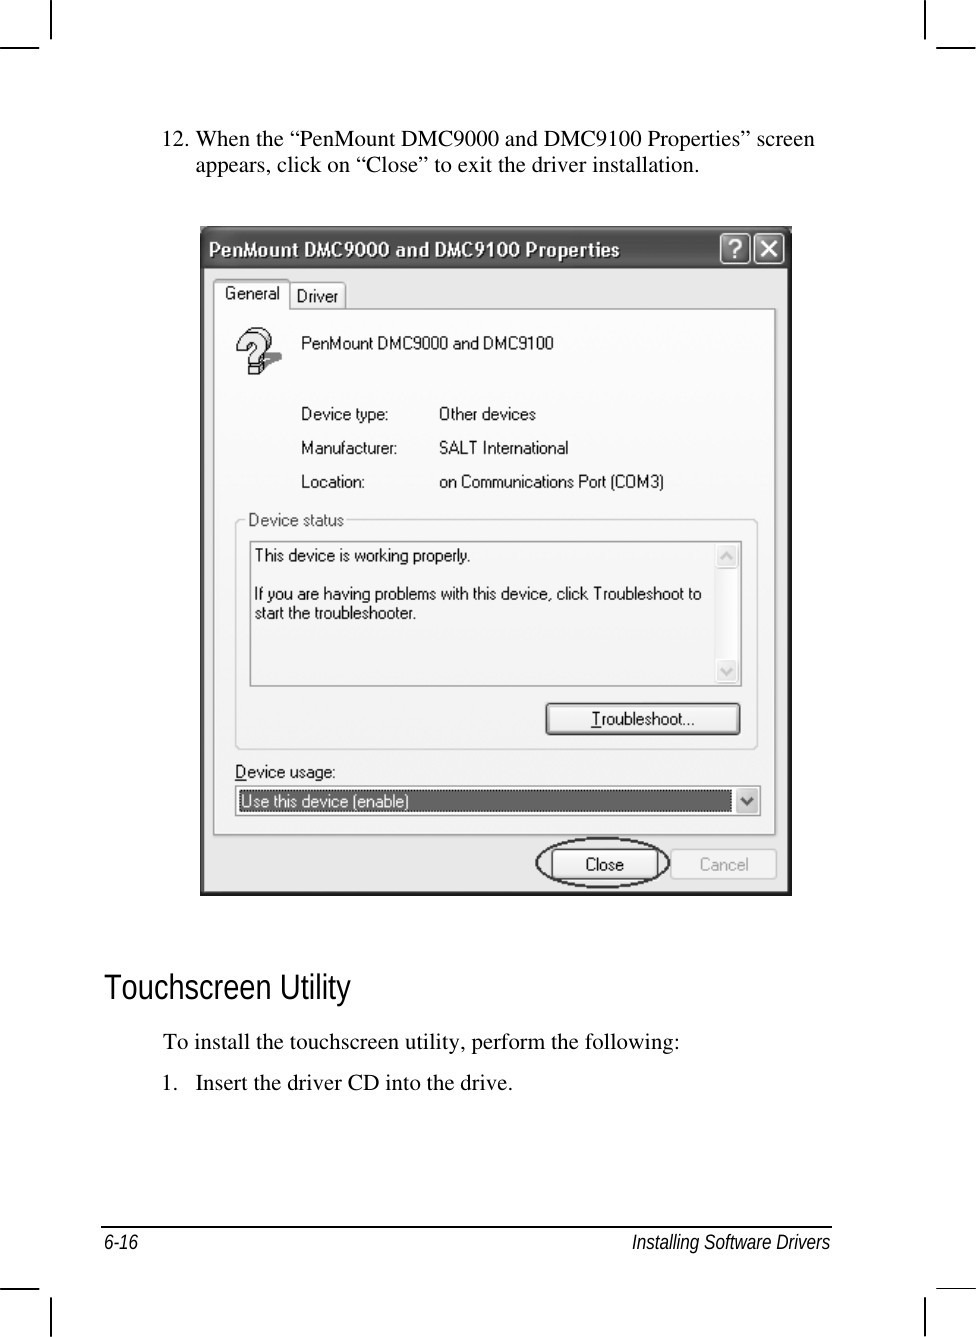  6-16  Installing Software Drivers 12. When the “PenMount DMC9000 and DMC9100 Properties” screen appears, click on “Close” to exit the driver installation.  Touchscreen Utility To install the touchscreen utility, perform the following: 1.  Insert the driver CD into the drive. 